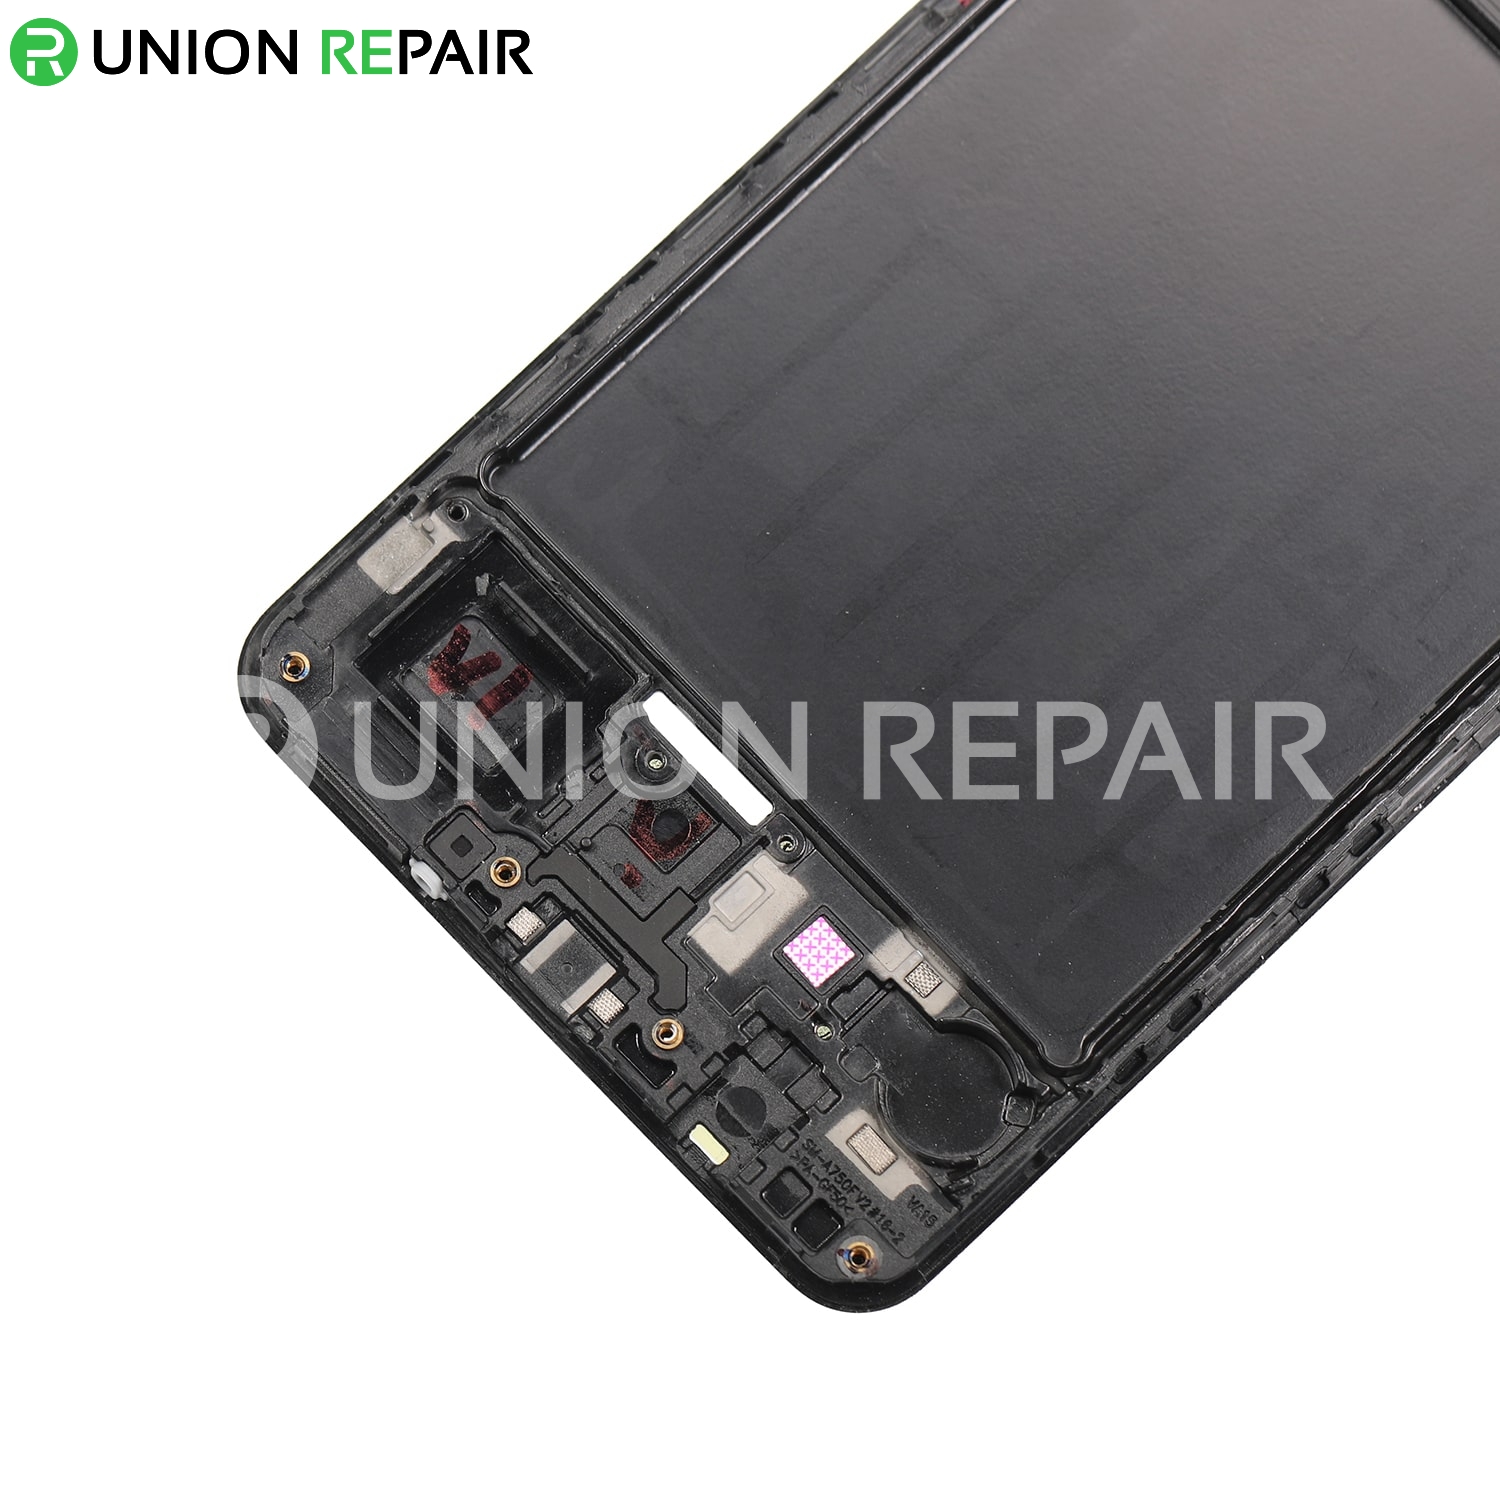 Replacement for Samsung Galaxy A7 (2018) SM-A750 Middle Plate